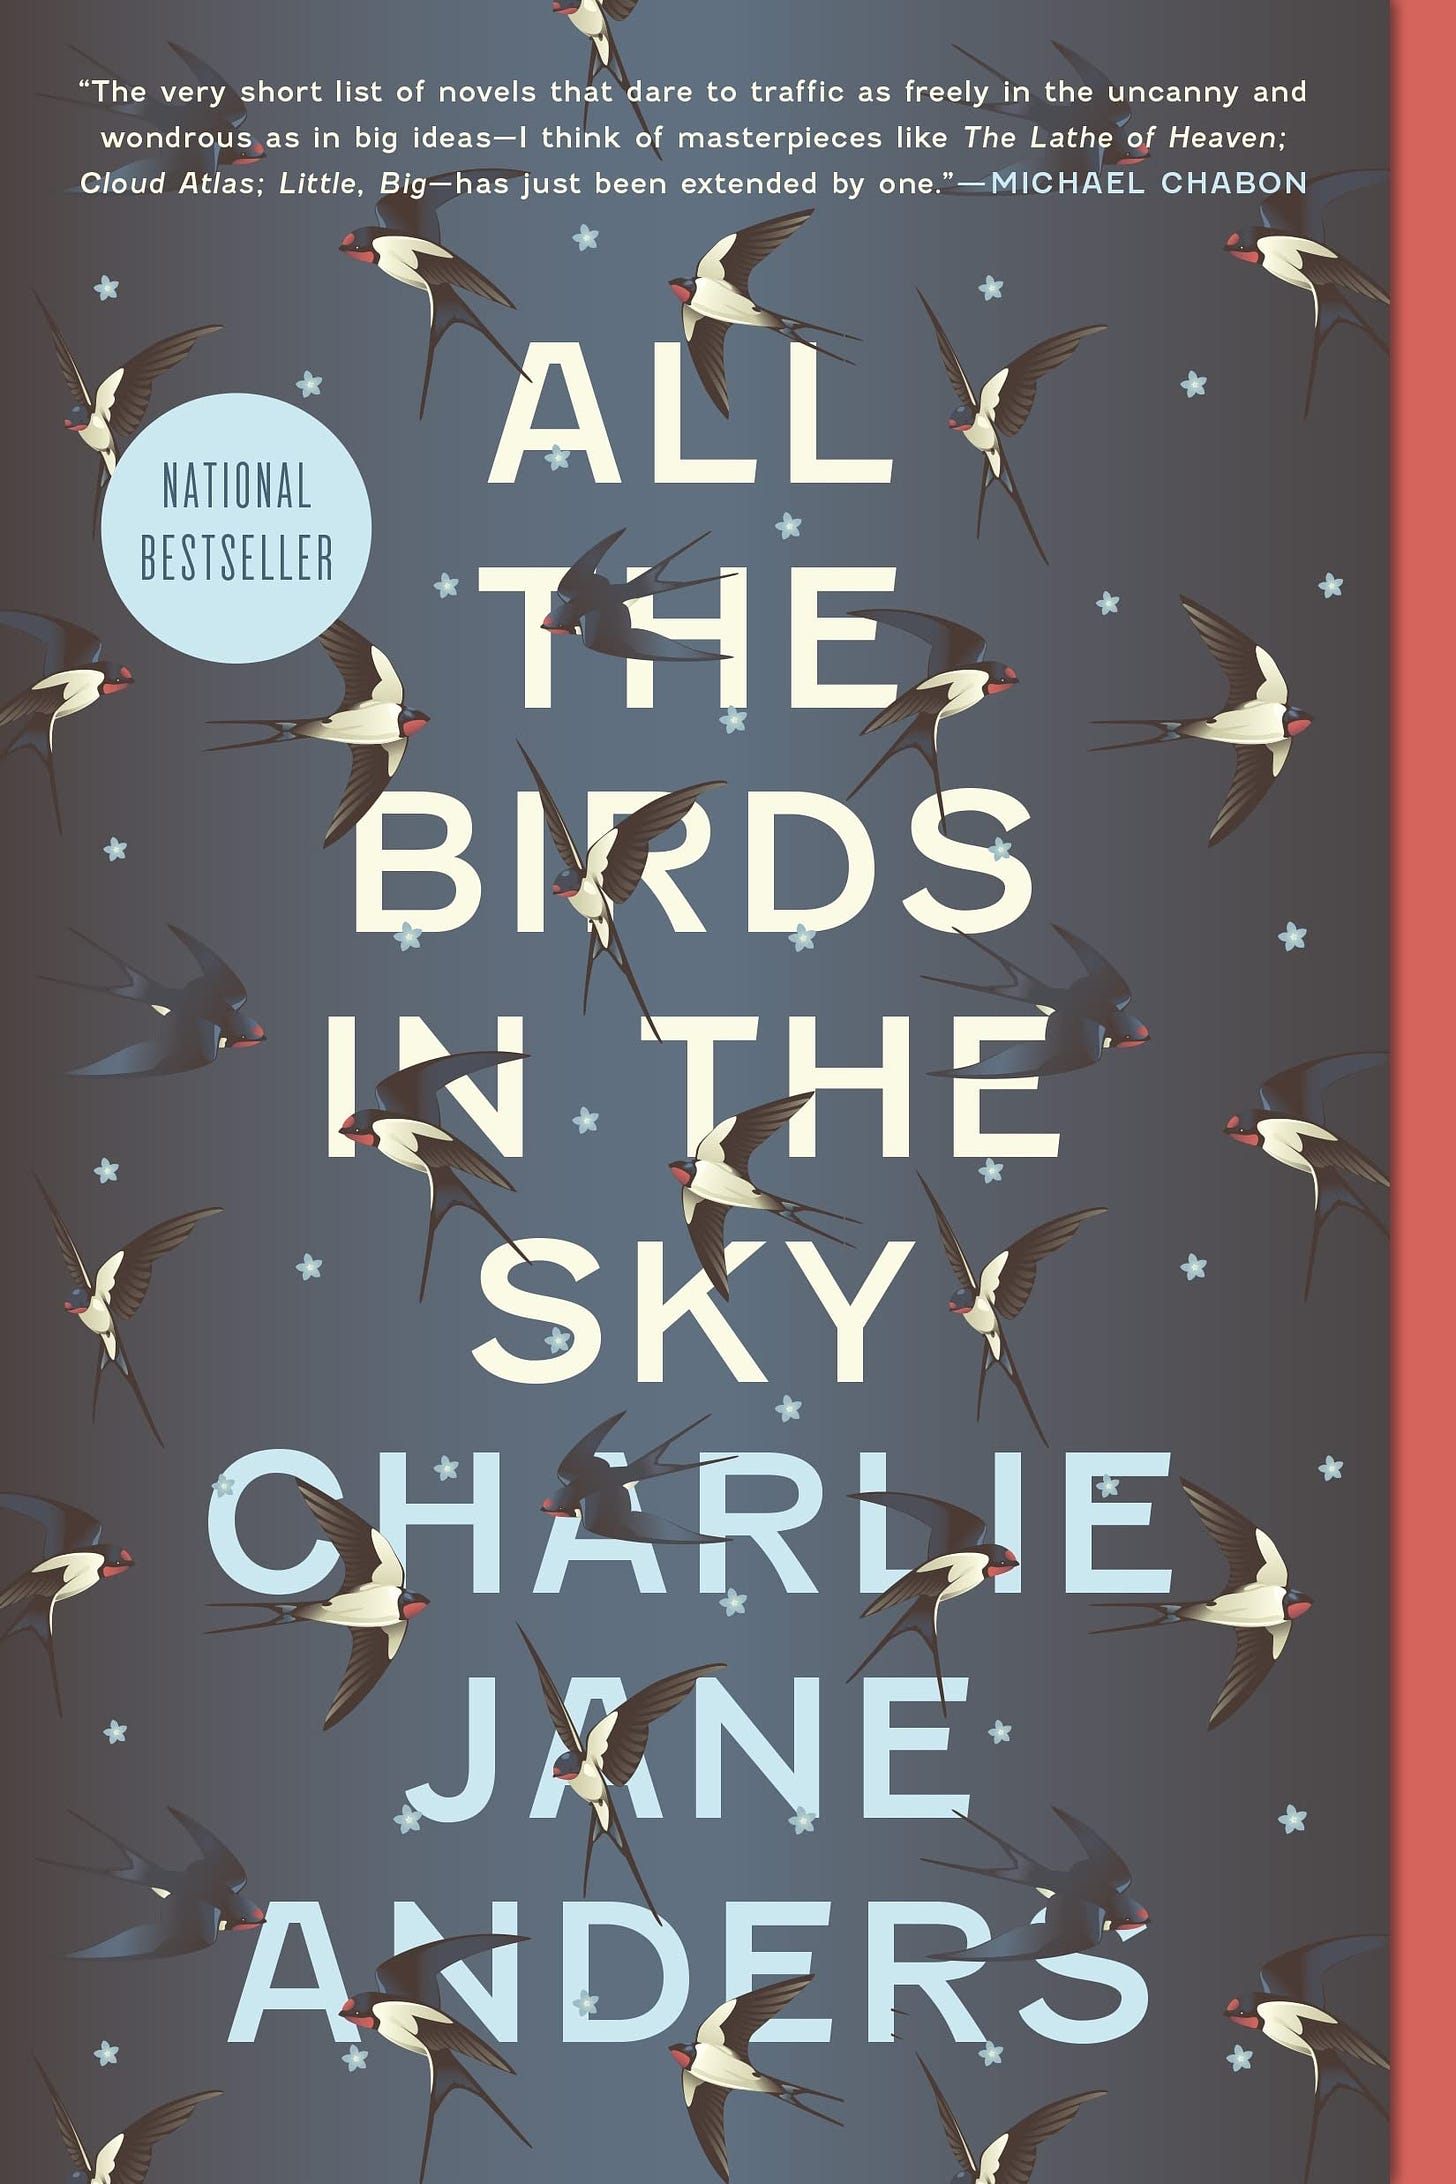 Buy All the Birds in the Sky Book Online at Low Prices in India | All the  Birds in the Sky Reviews & Ratings - Amazon.in